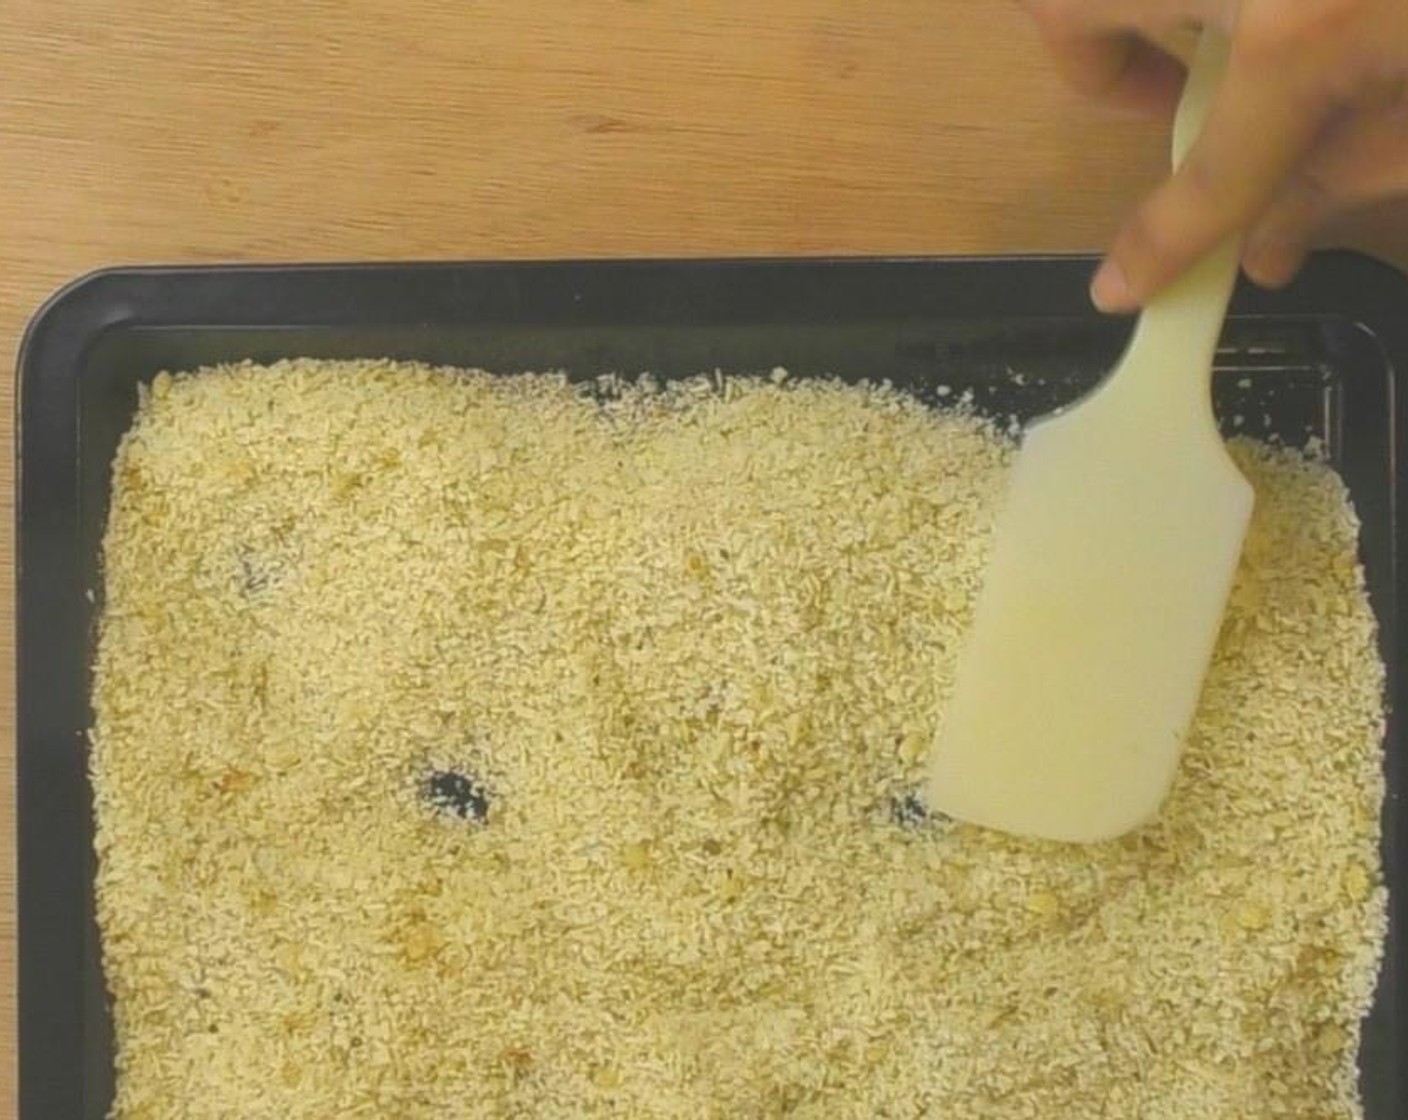 step 3 Then spread half the breadcrumb mixture onto a baking dish and set aside.